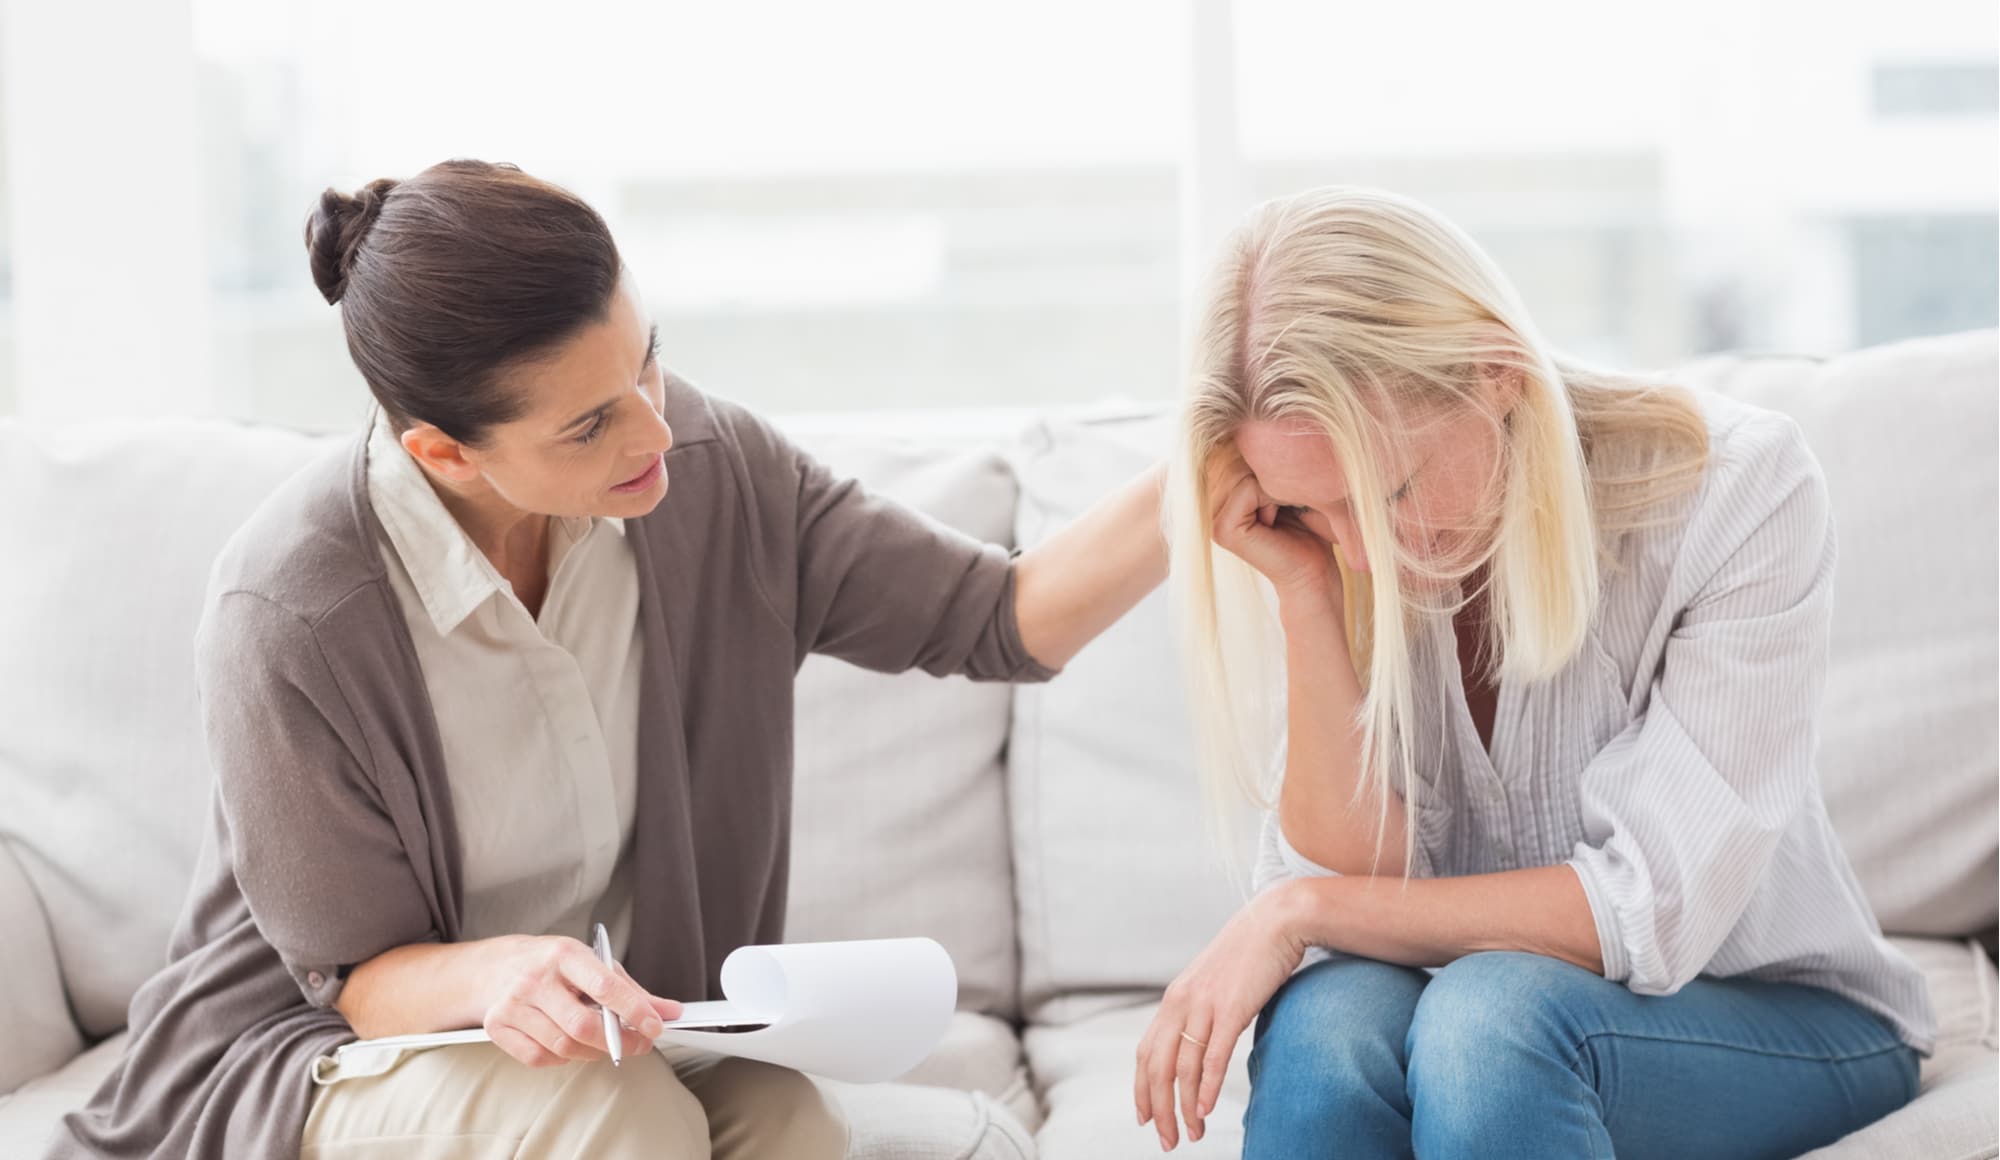 Common Symptoms of Alcoholism Pathfinders Recovery Center - A young woman who has been showing symptoms of an alcoholic is meeting with an addiction advisor to see if she needs inpatient treatment to break free from her alcohol abuse disorder.